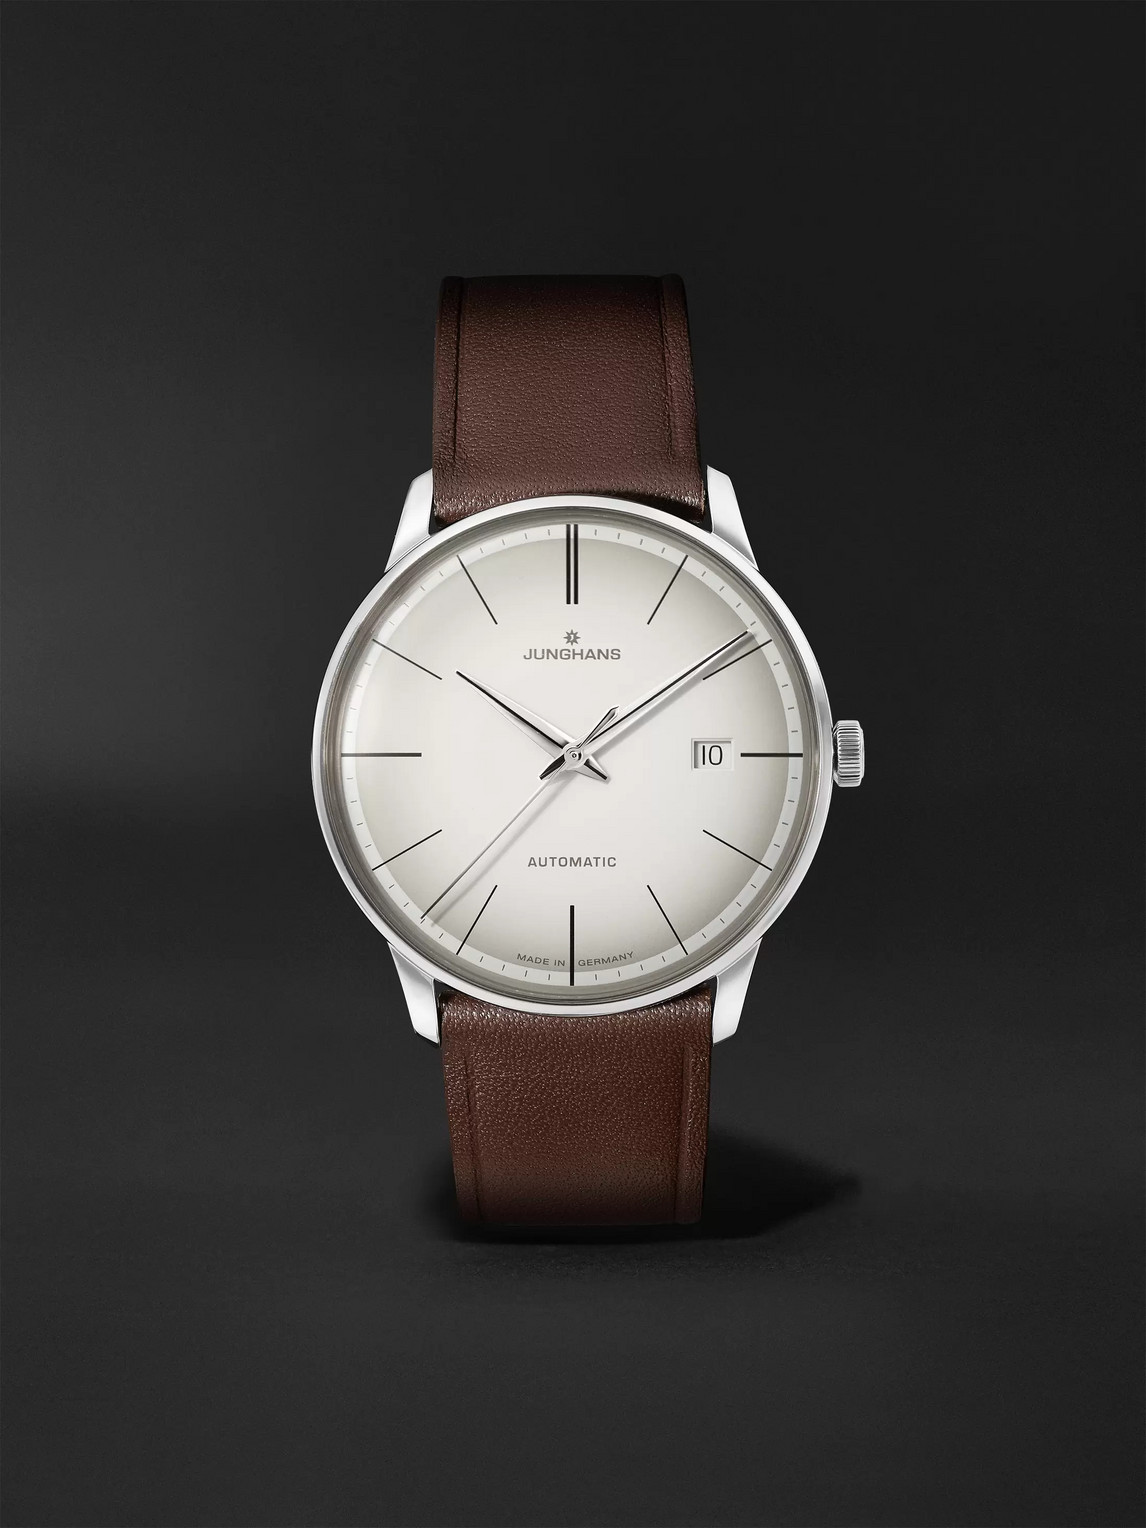 Junghans Meister Automatic 38mm Stainless Steel And Leather Watch, Ref. No. 027/4050.00 In White